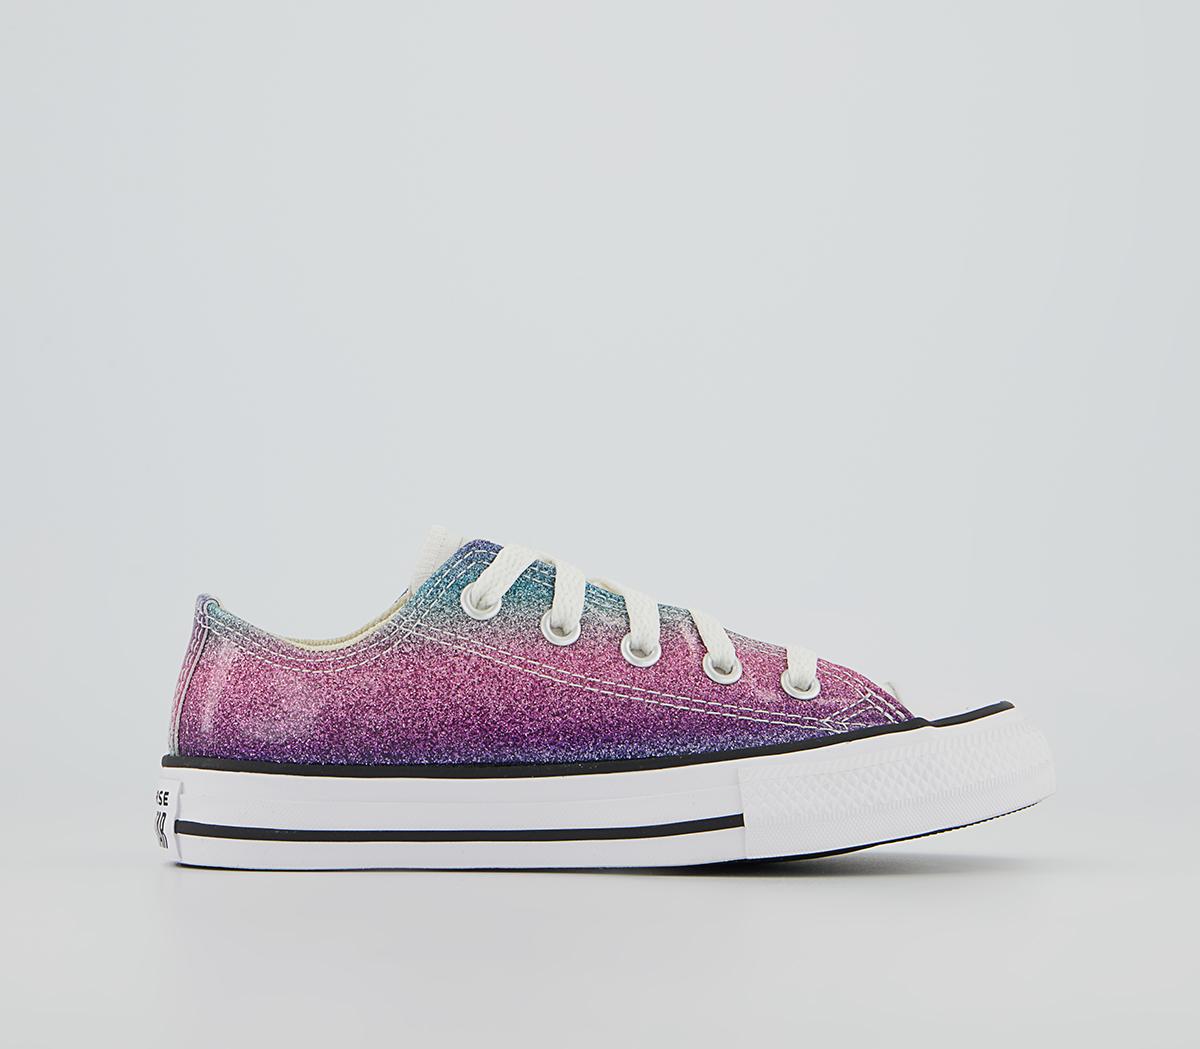 ConverseAll Star Low Youth TrainersPink Purple Teal Glitter